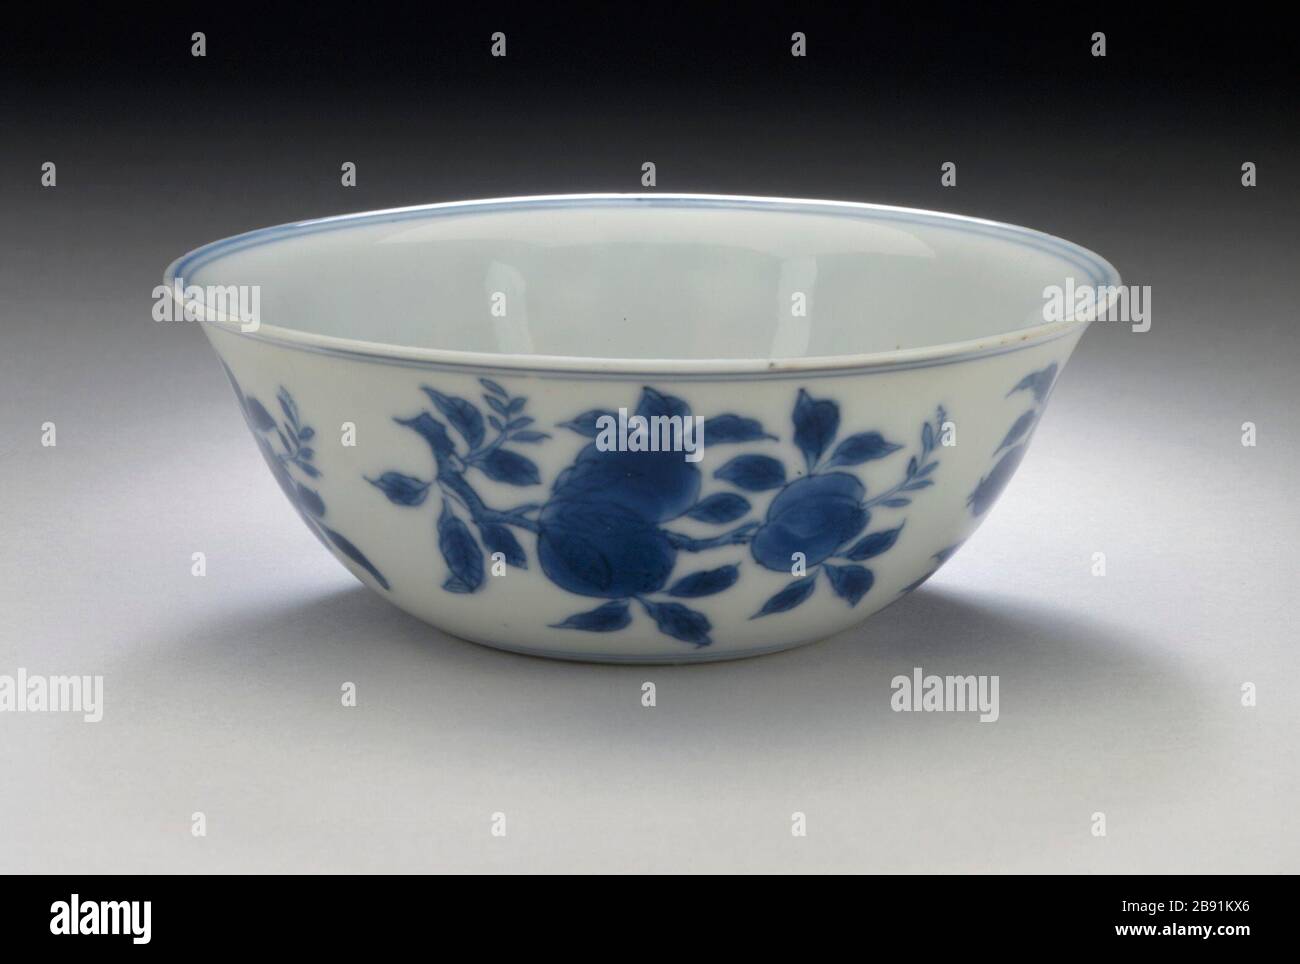 Pair of Bowls (Wan) with Pomegranates, Lotuses, Chrysanthemums, Peonies,  and Camelias; English: China, Jiangxi Province, Jingdezhen, Chinese, Ming  dynasty, Wanli mark and period, 1573-1620 Furnishings; Serviceware  Wheel-thrown porcelain with blue ...